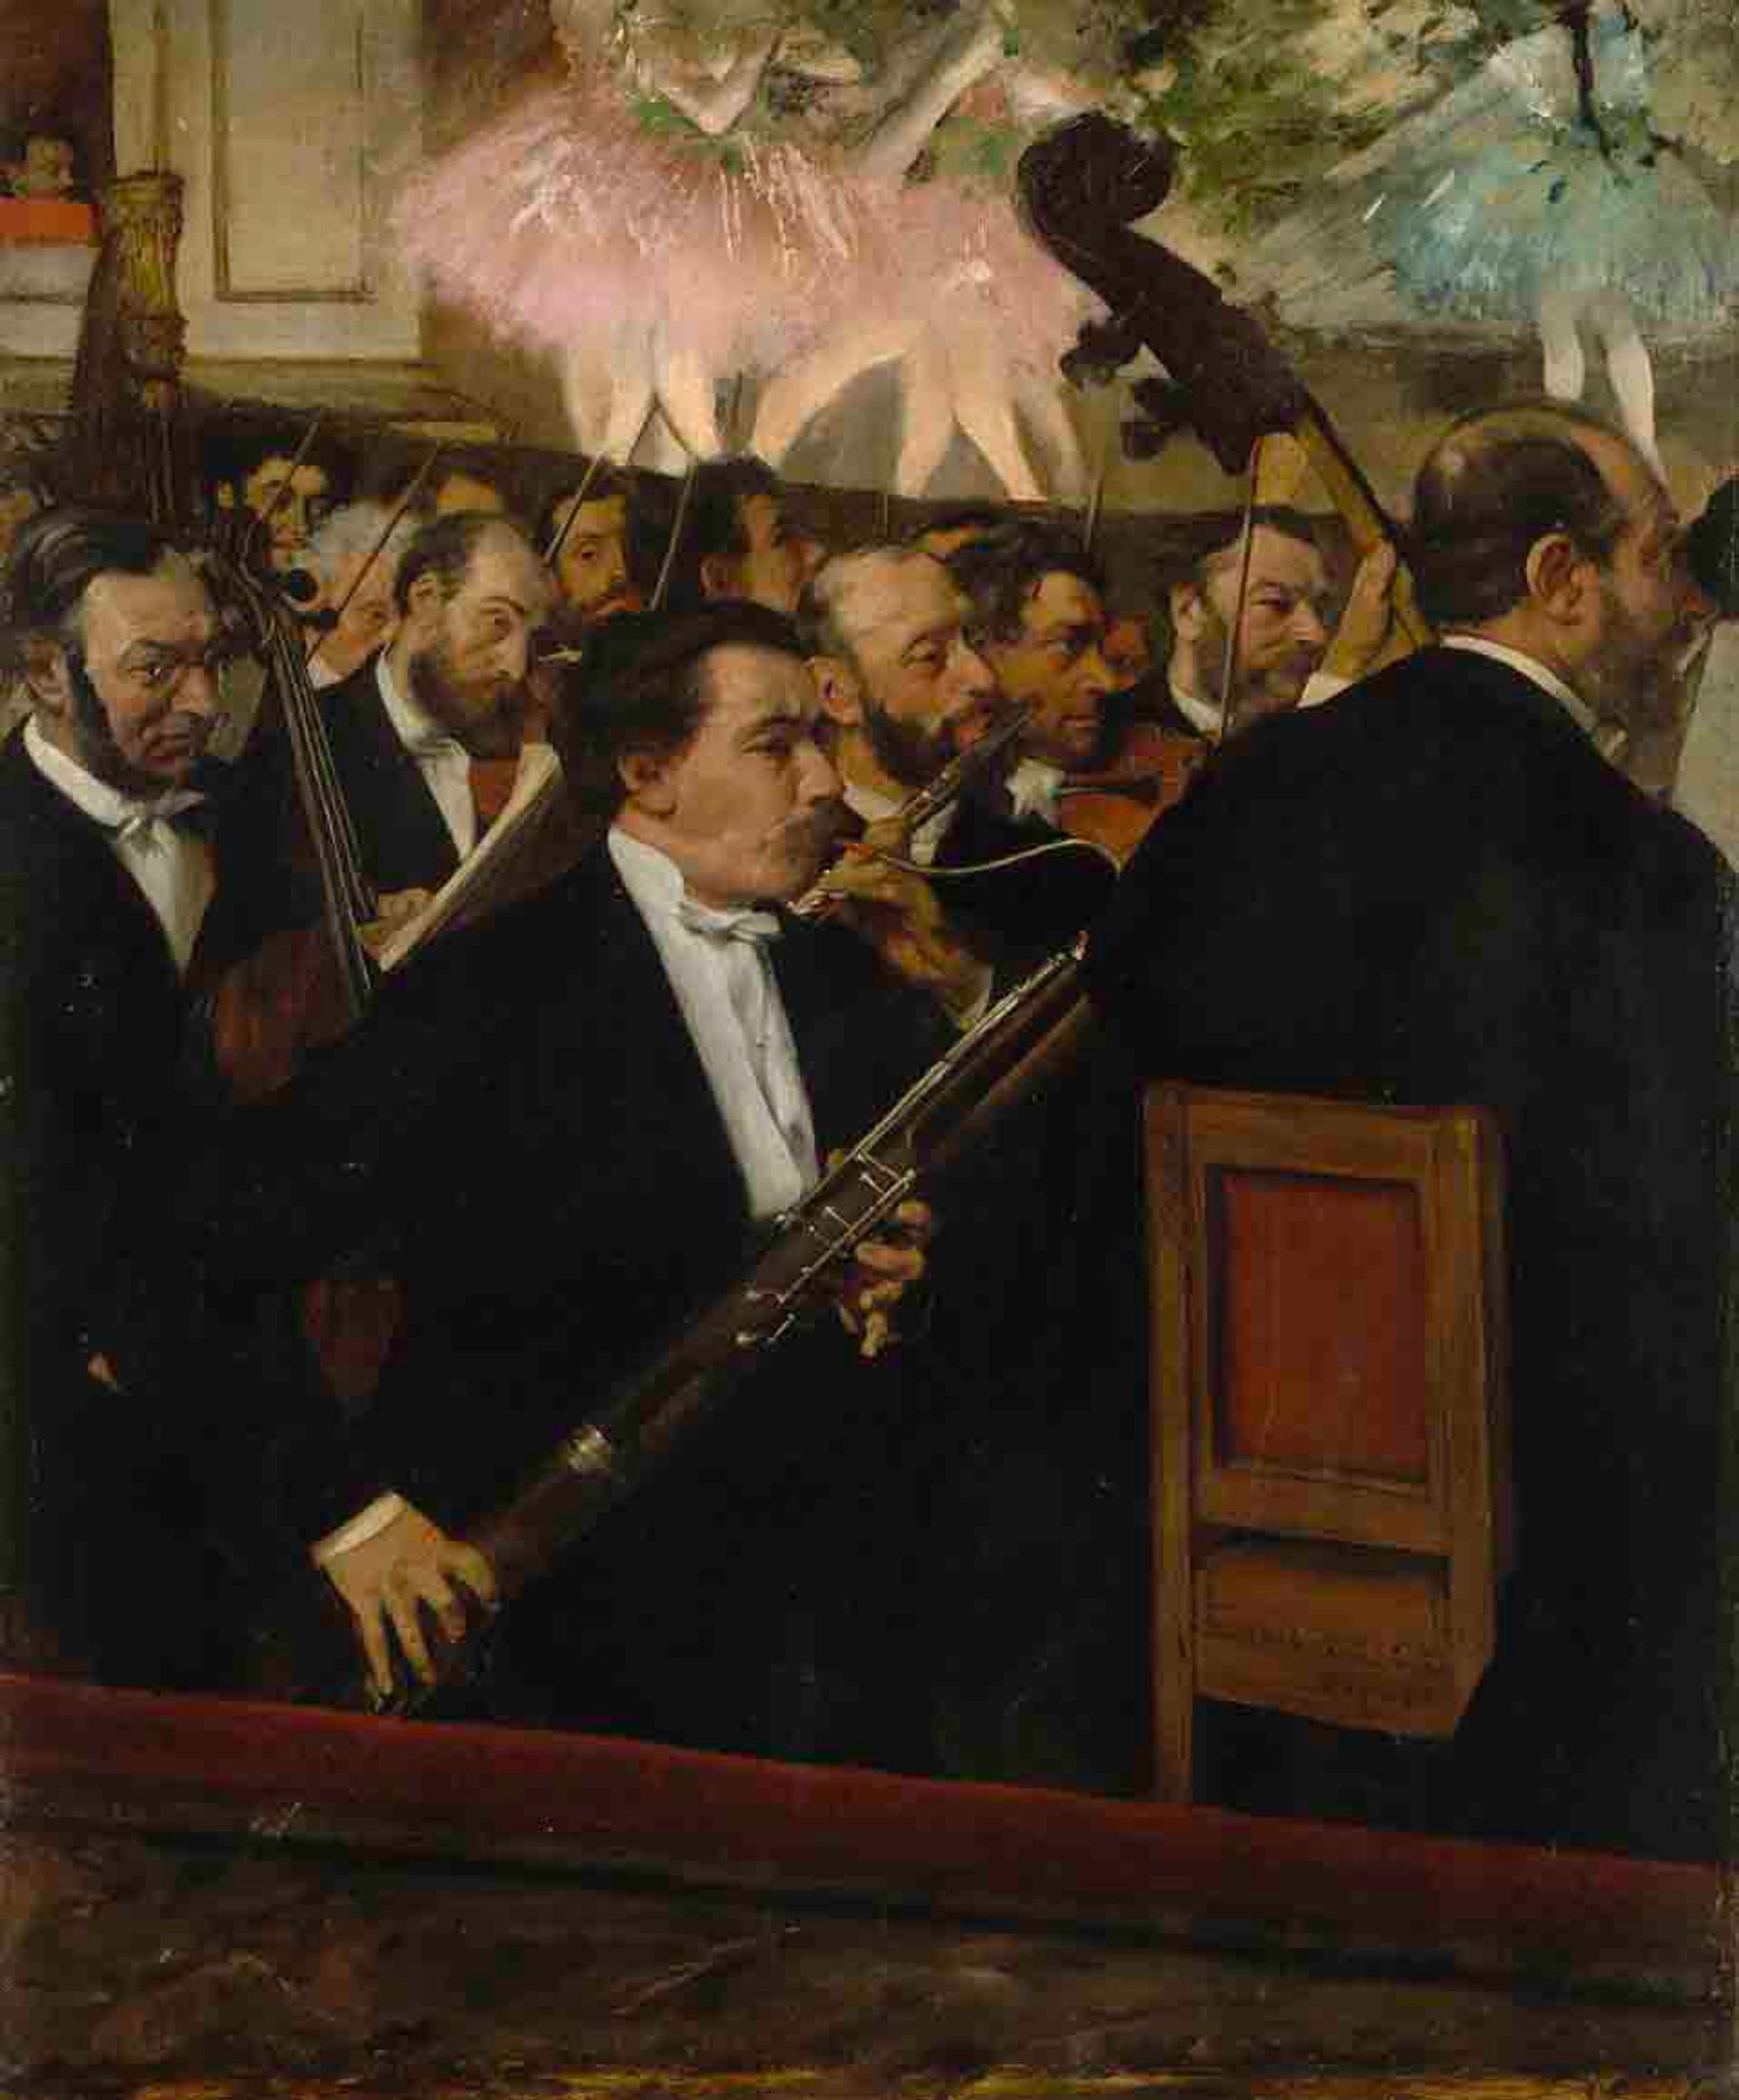 Edgar Degas, The Orchestra of the Opéra (1870) Courtesy of the Musée d’Orsay, Paris